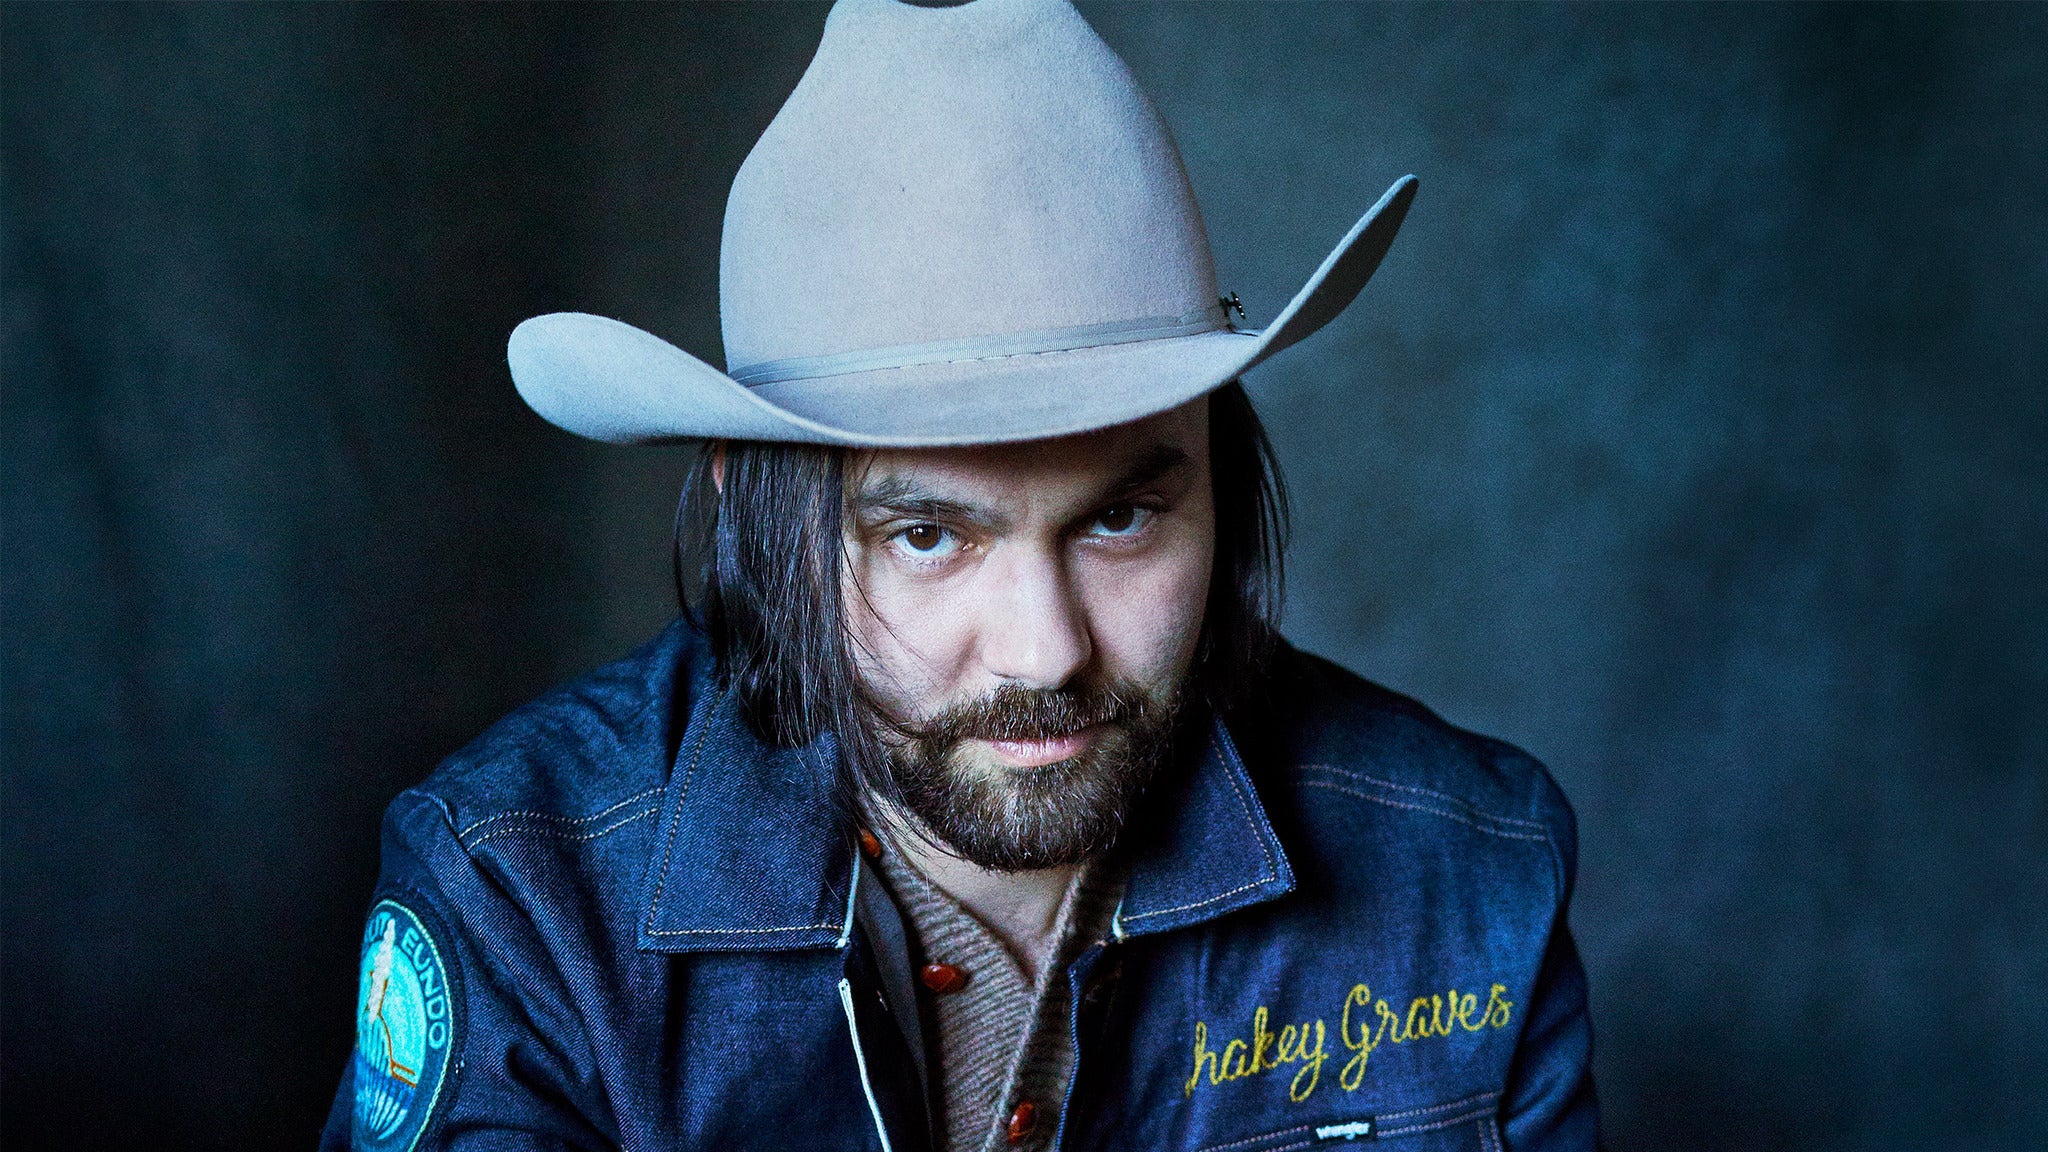 Image used with permission from Ticketmaster | Shakey Graves tickets